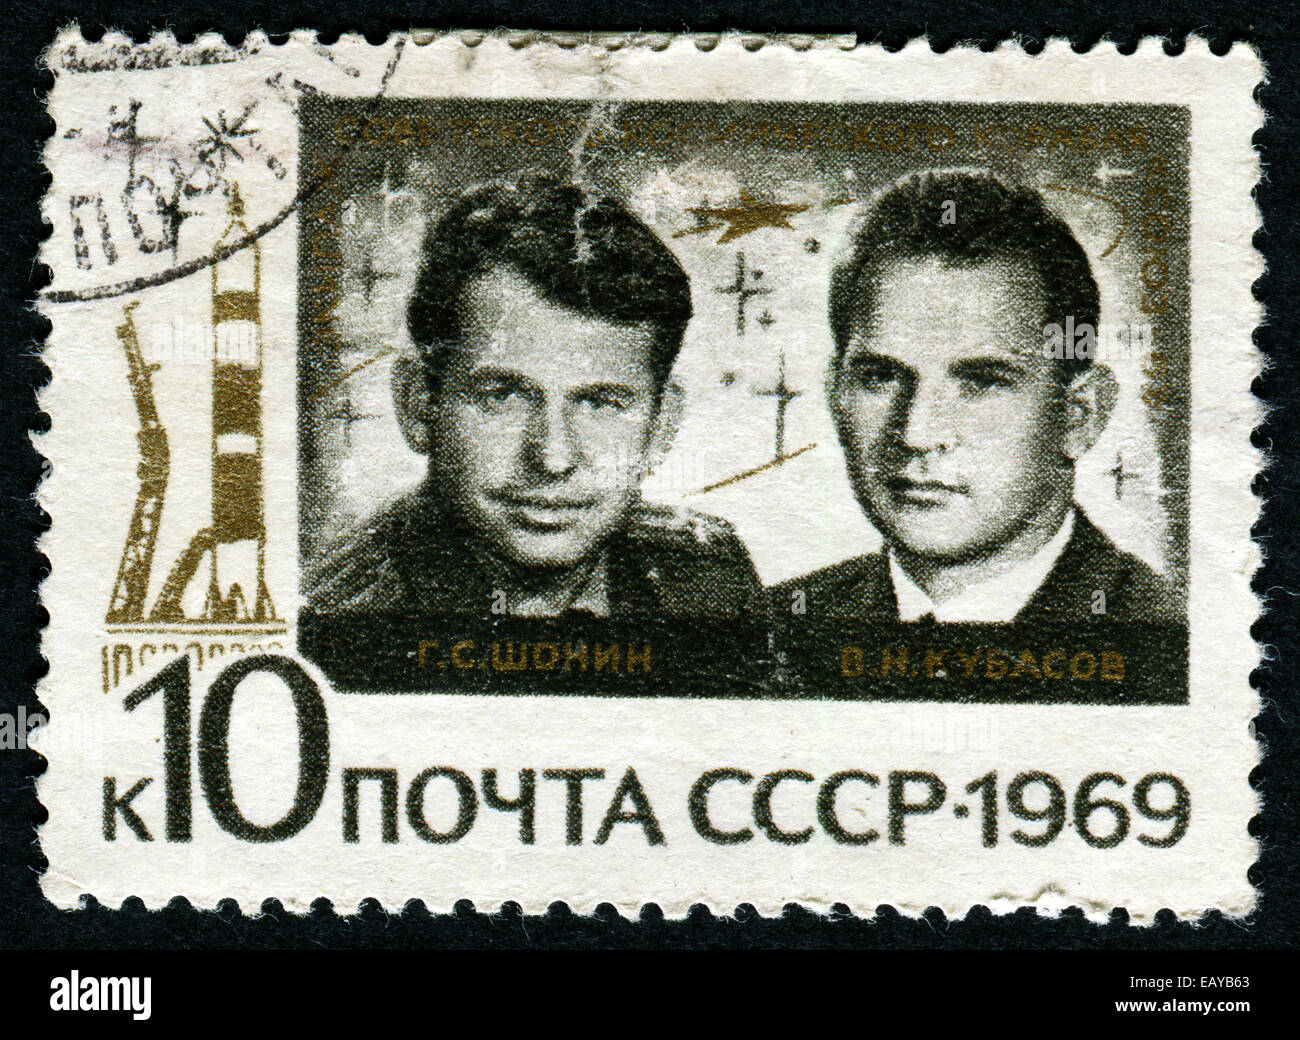 USSR- Circa 1969: USSR stamp dedicated to cosmonauts Shatalov and Eliseev, from series 'First group space flight', circa 1969. Stock Photo